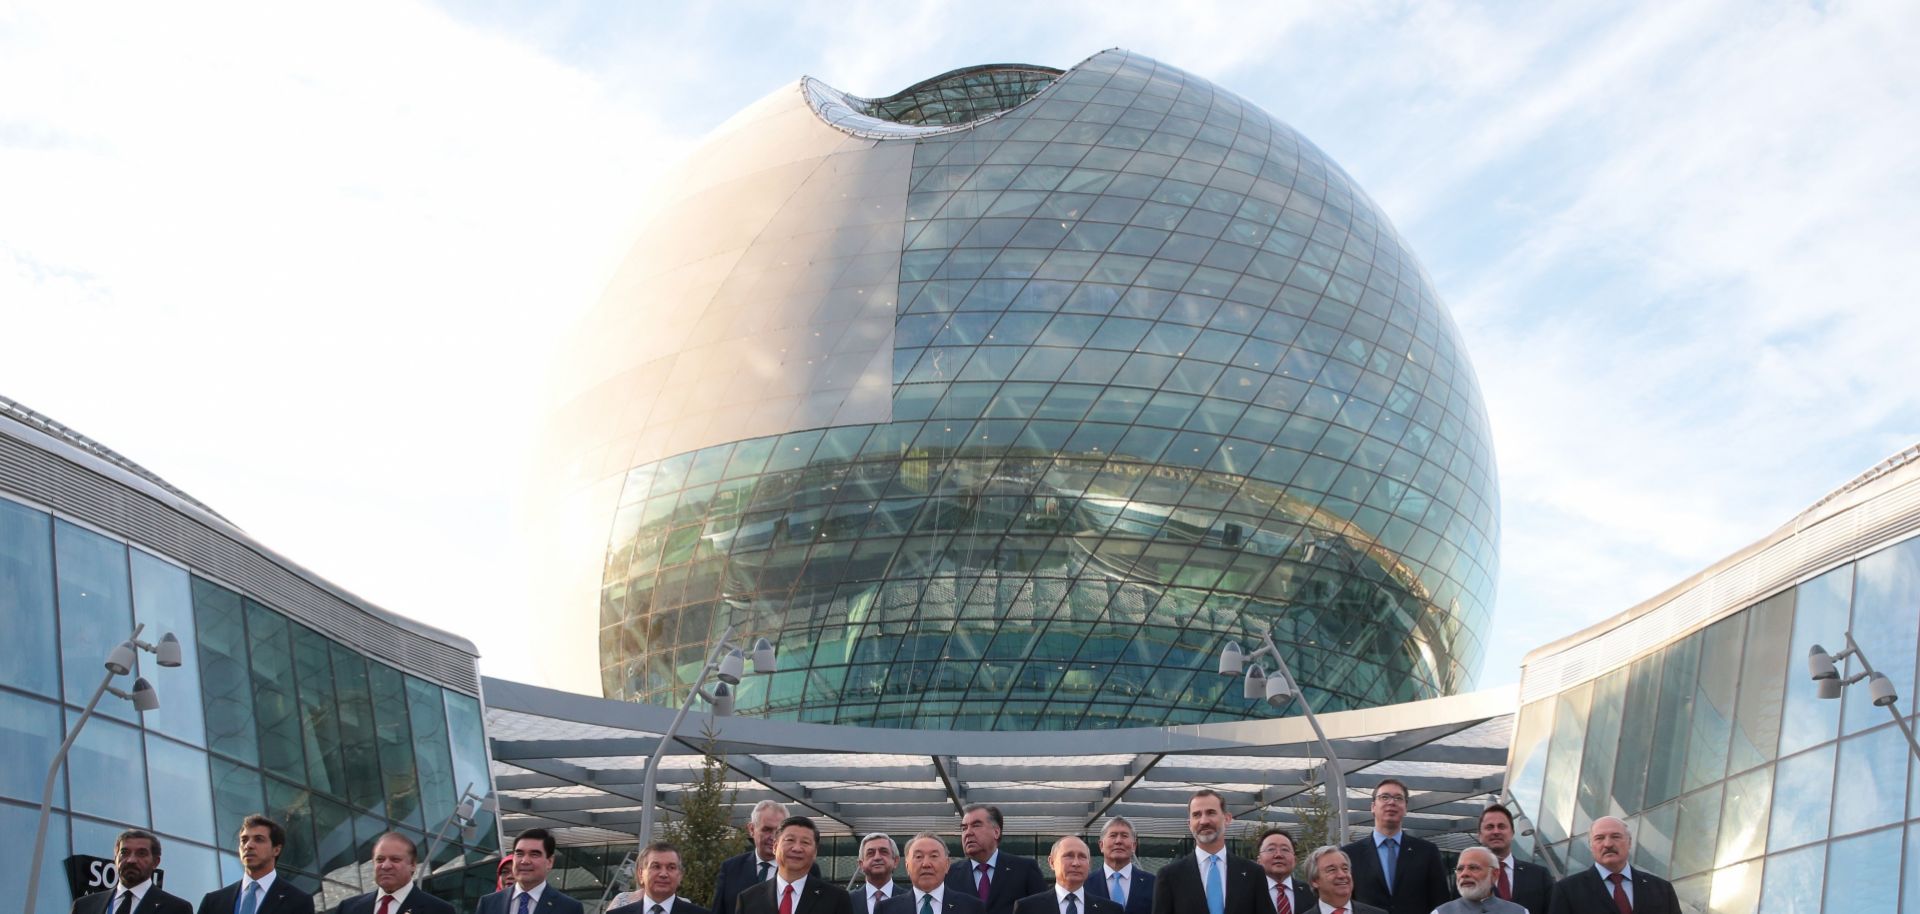 Heads of state stand in front of the EXPO 2017 exhibition in Astana, Kazakhstan on June 9.